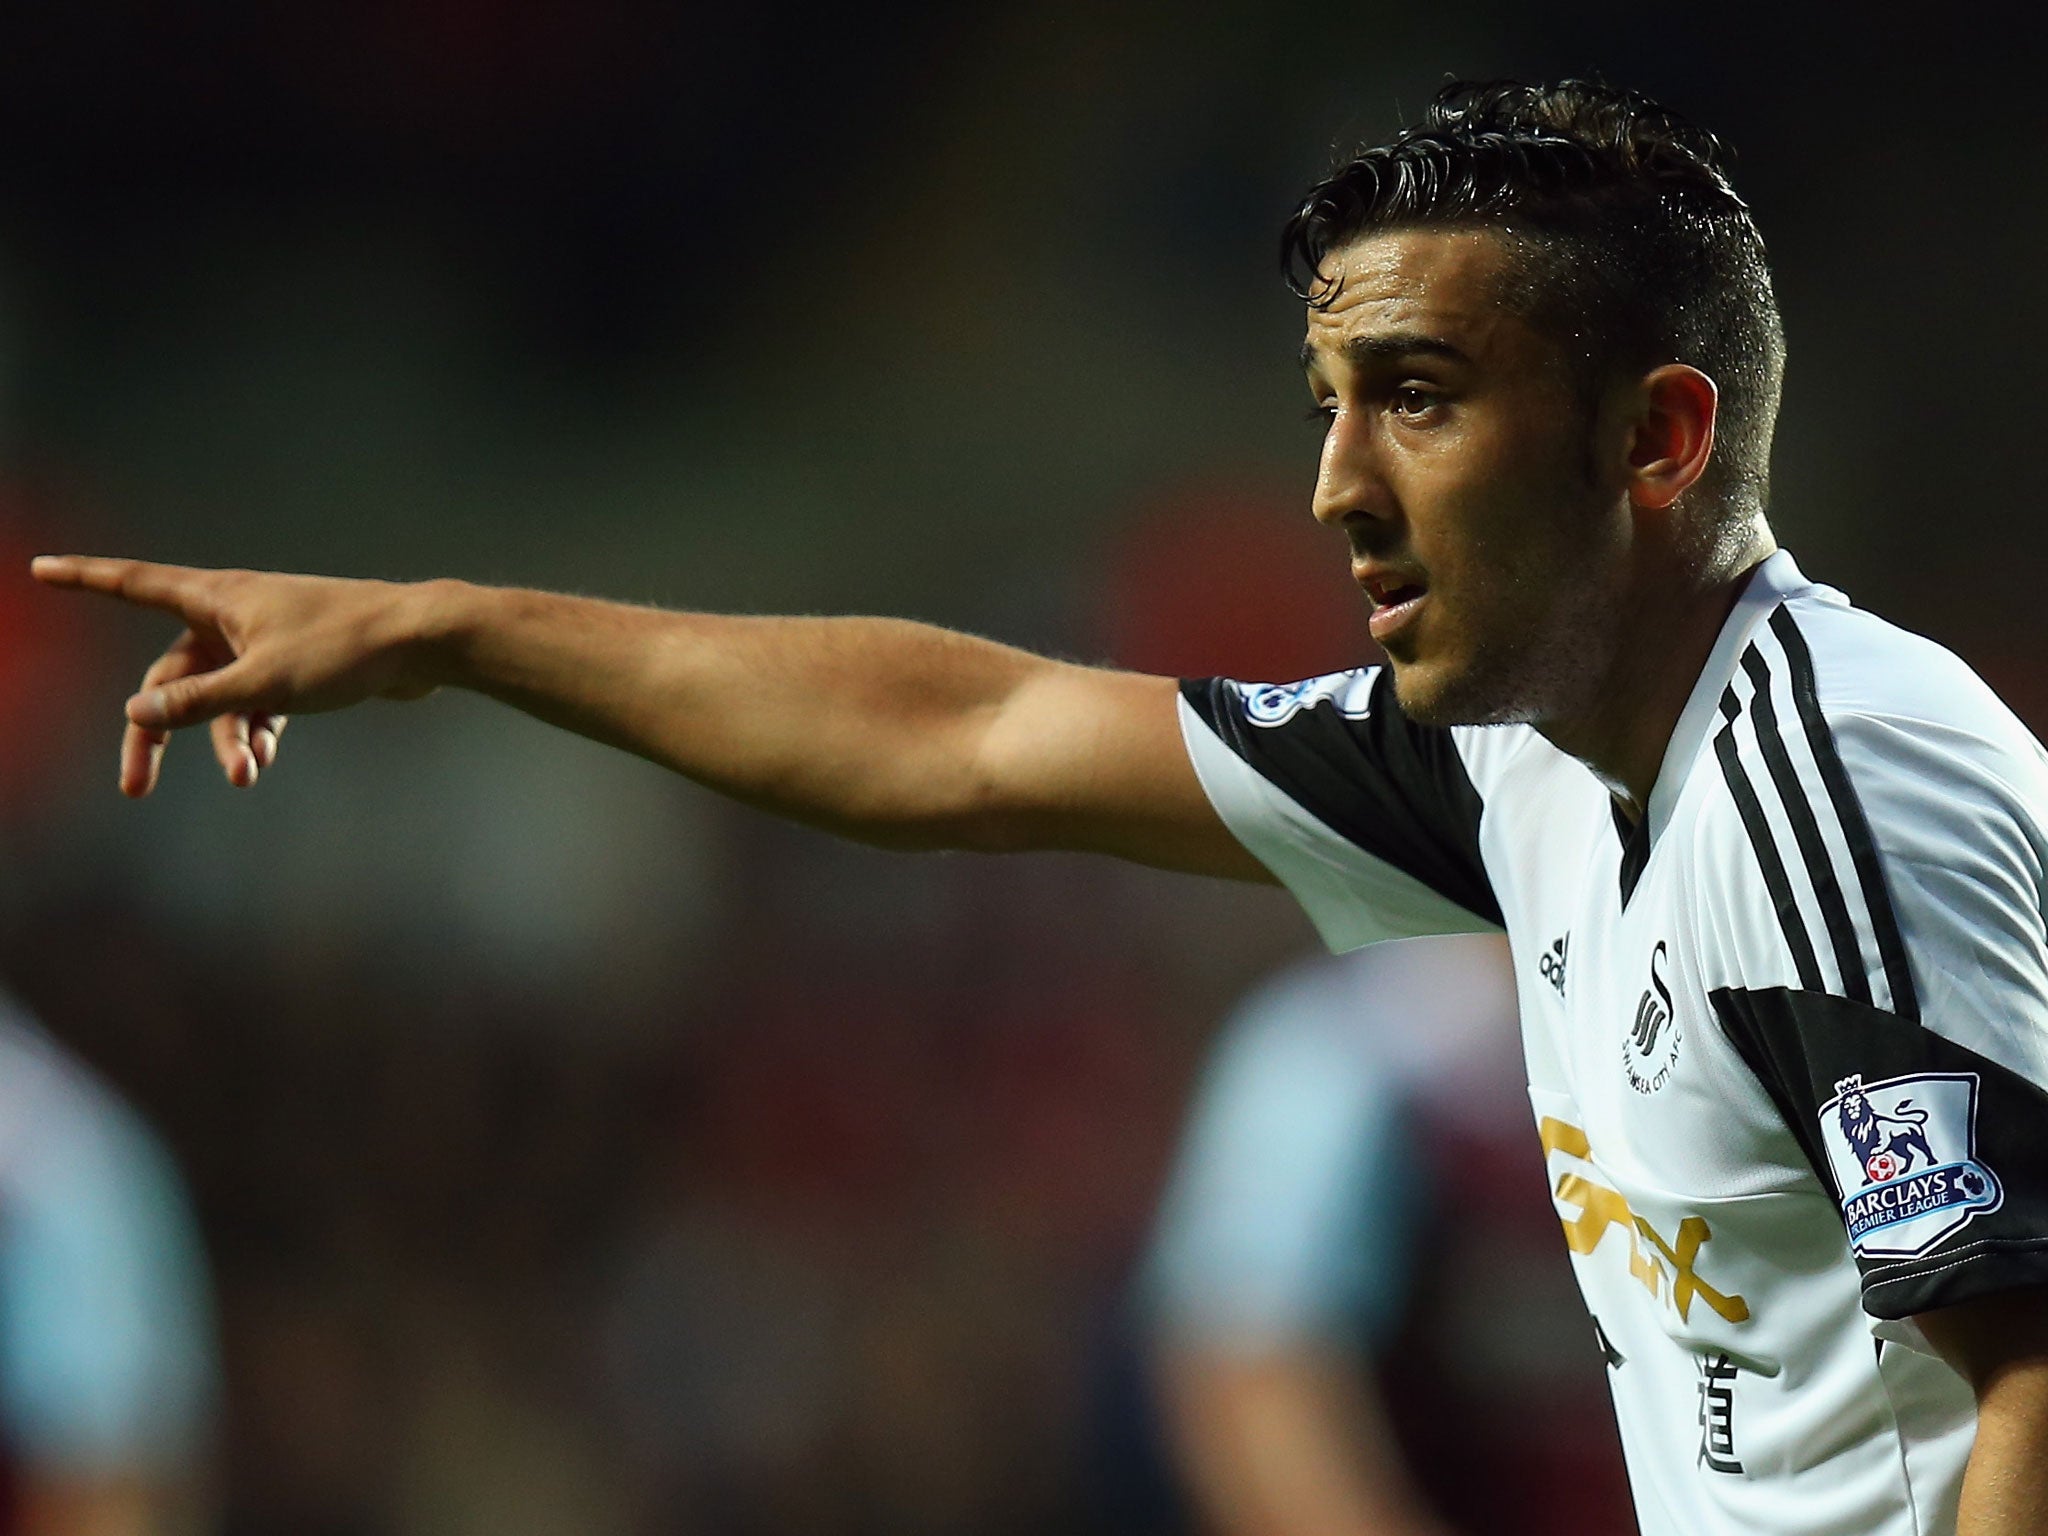 If a Swansea player went out in Cardiff, you'd be spotted, says Neil Taylor... You just save yourself the hassle